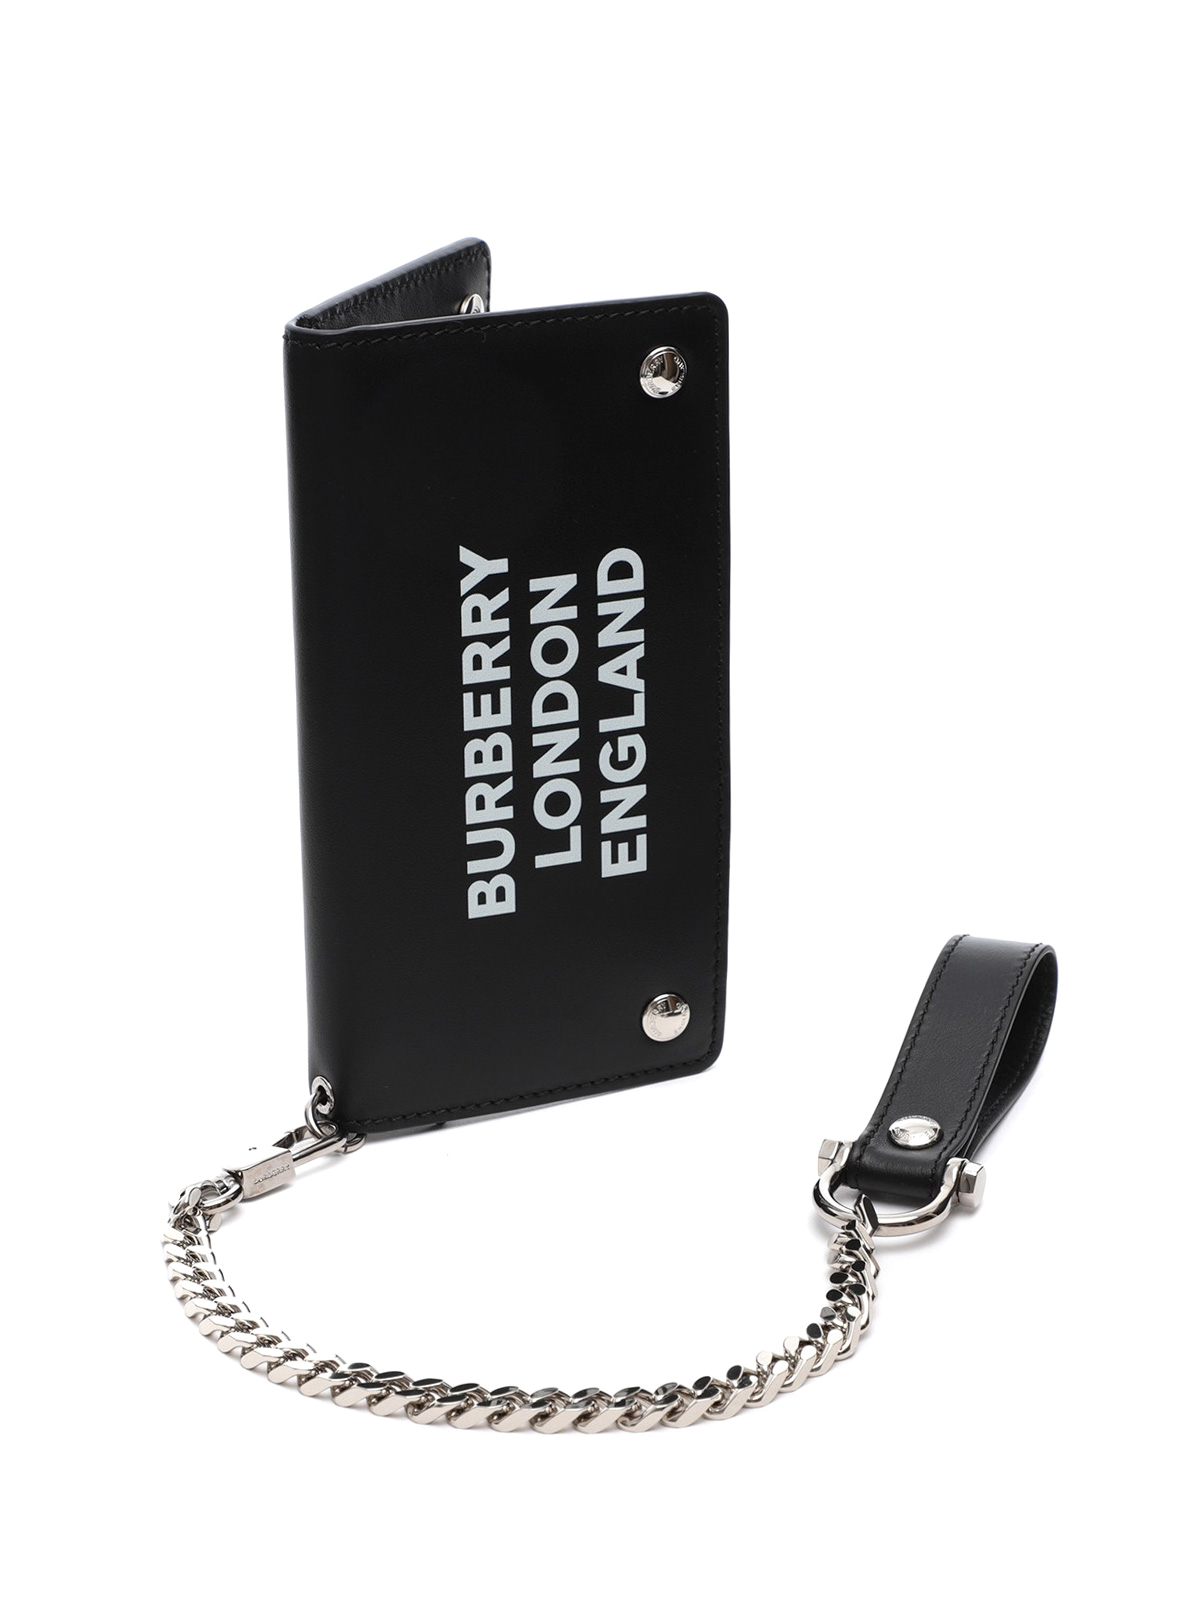 Burberry Leather Chain Wallet Logo Card Holders